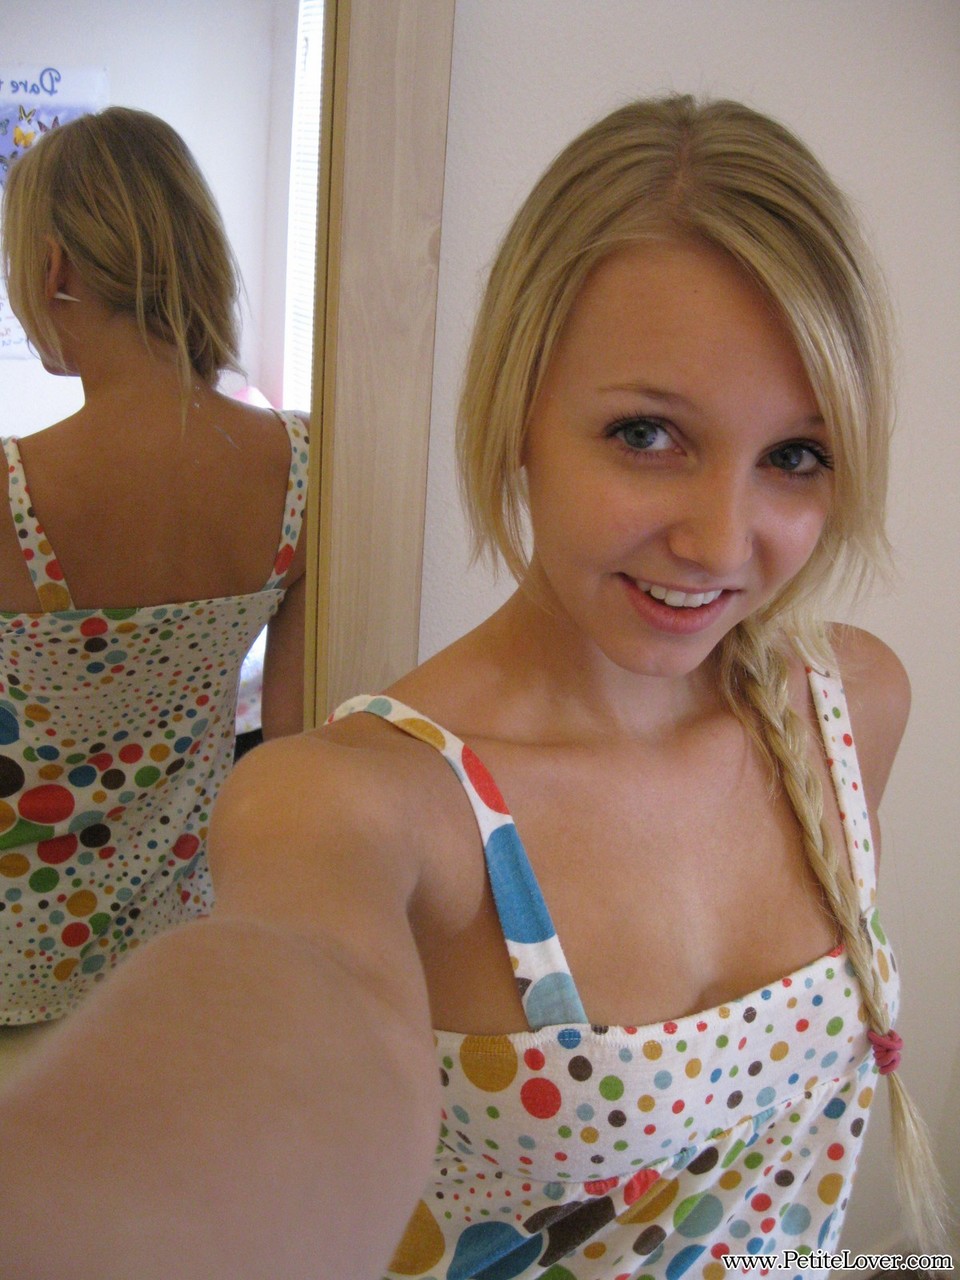 Blonde first timer exposes her tits and twat for self shots in the mirror photo